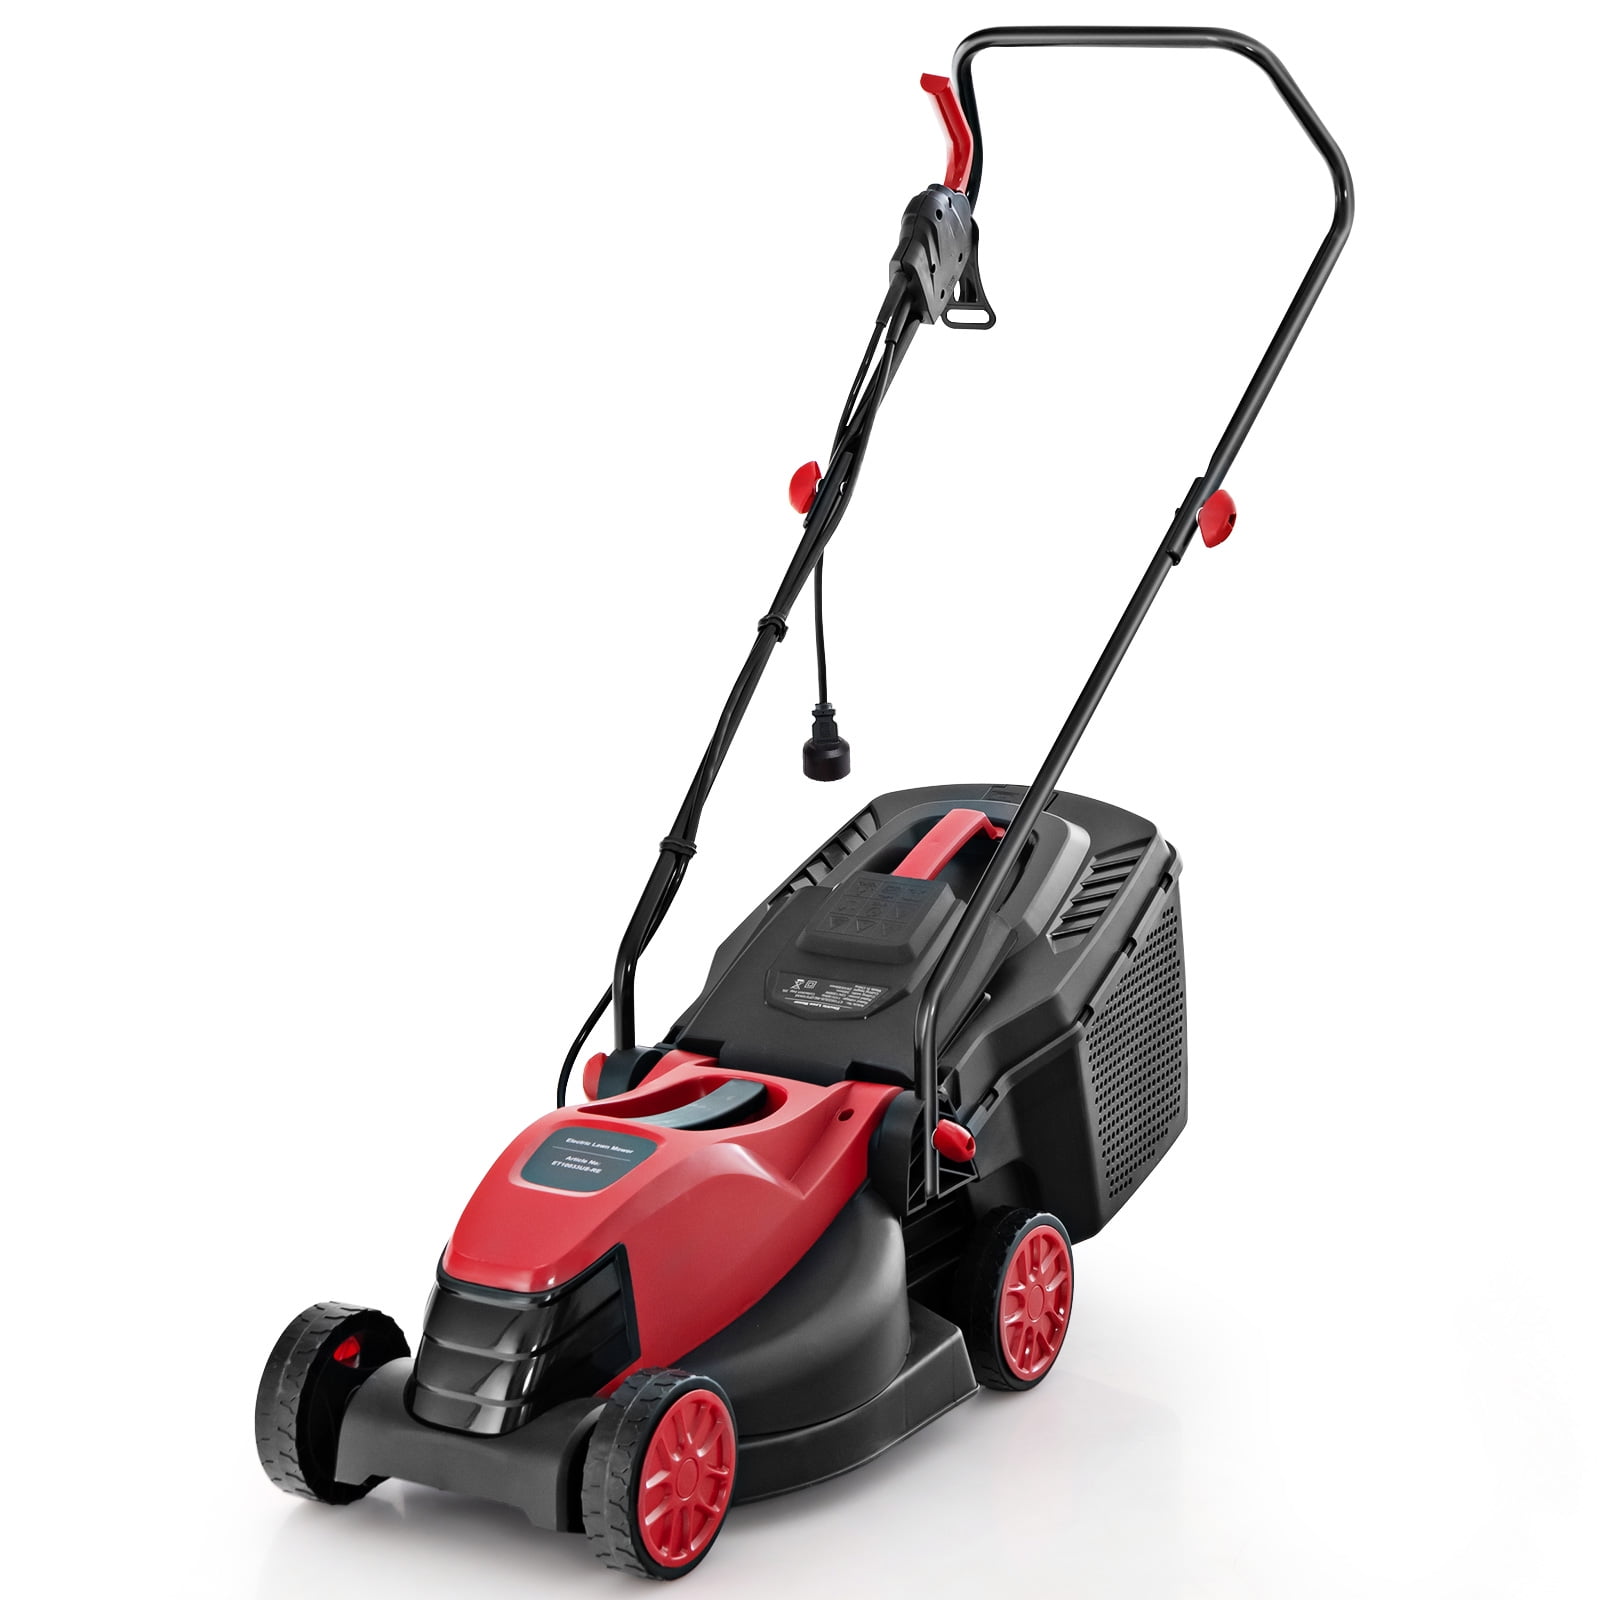 GIVIMO 15 Inch Electric Lawn Dethatcher with Dual Safety Switch,13